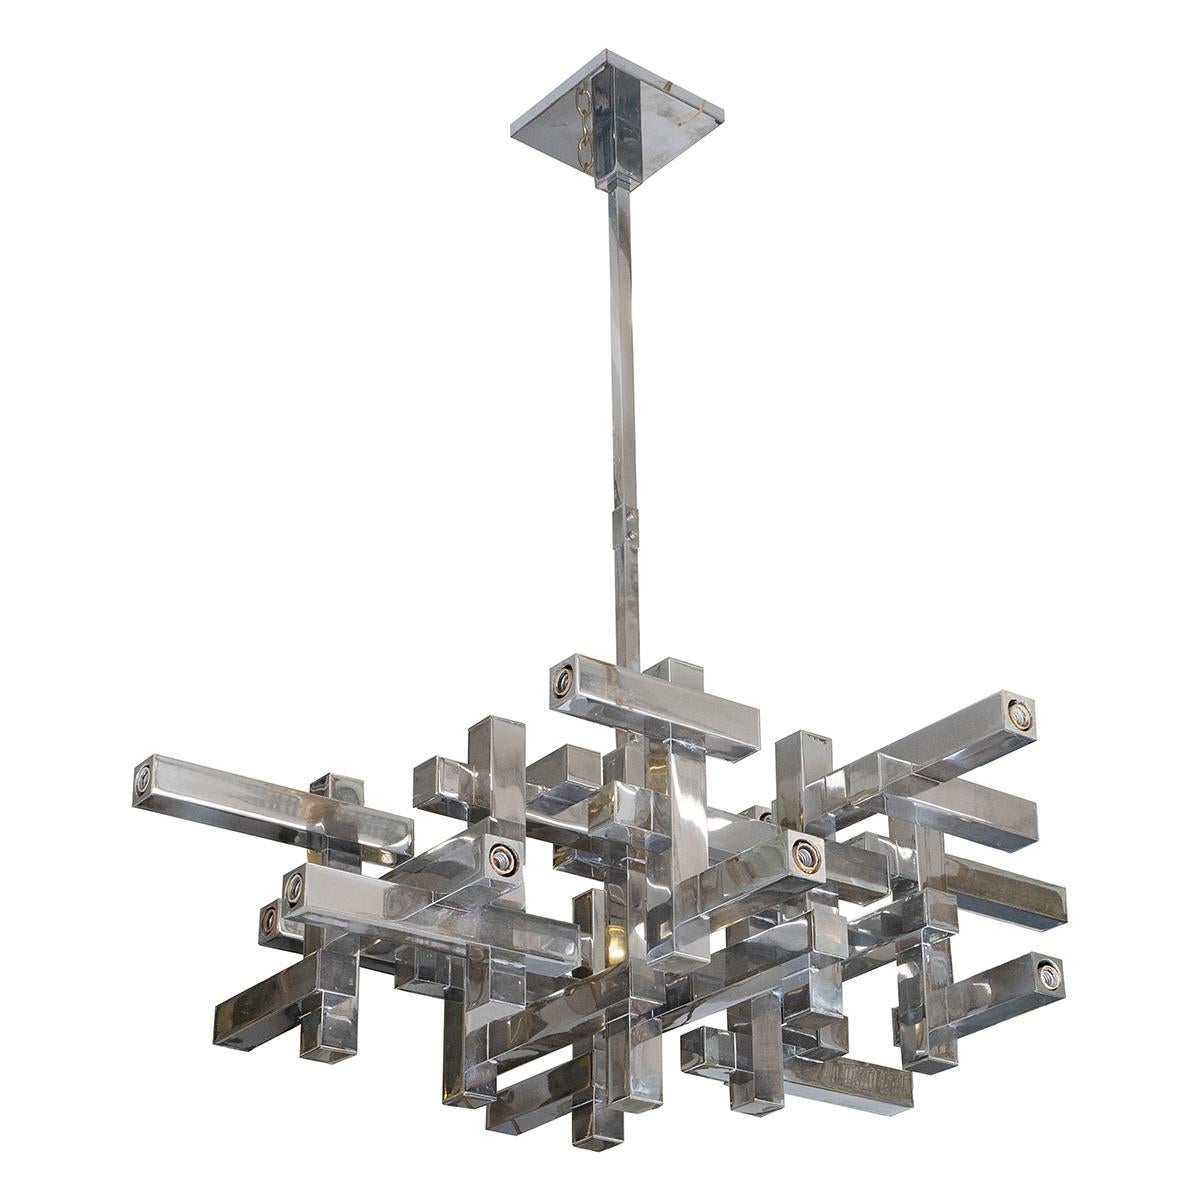 Cubist style chandelier composed of intersecting bars by Sciolari.